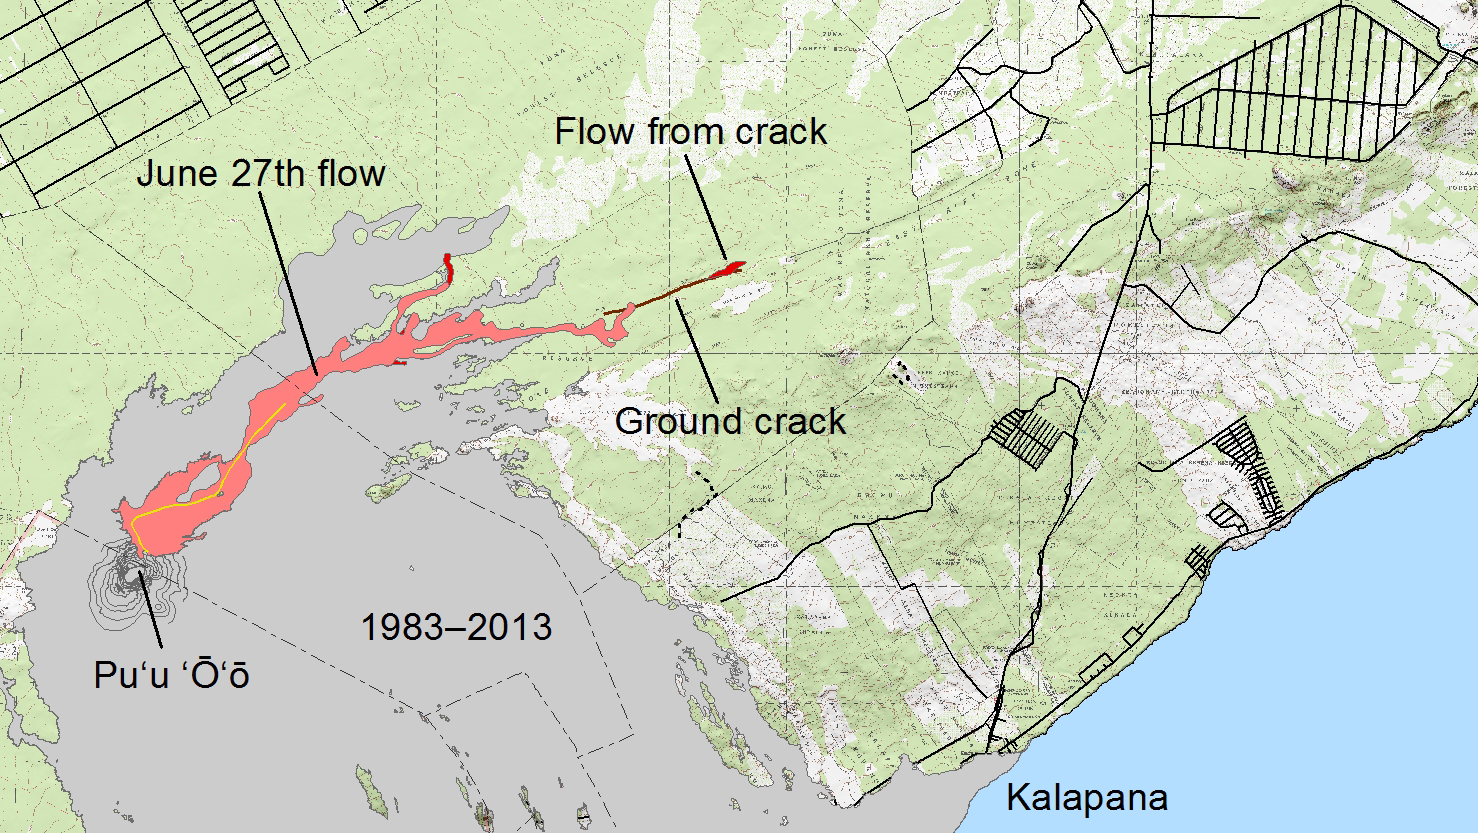 Close up of the USGS HVO map showing the location of the lava flow as of August 25th.